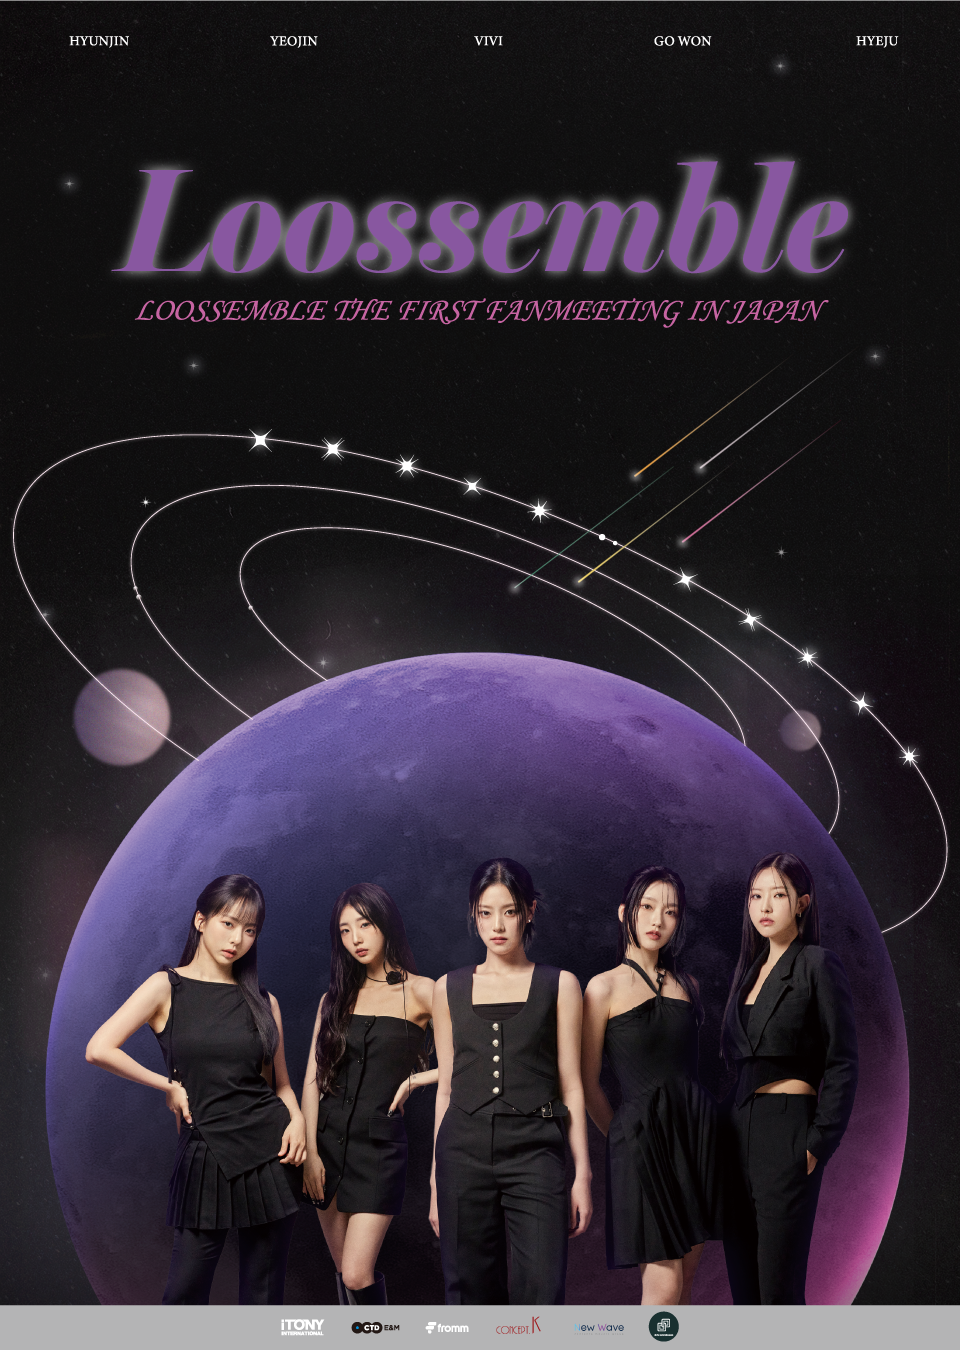 LOOSSEMBLE THE FIRST FANMEETING IN JAPAN